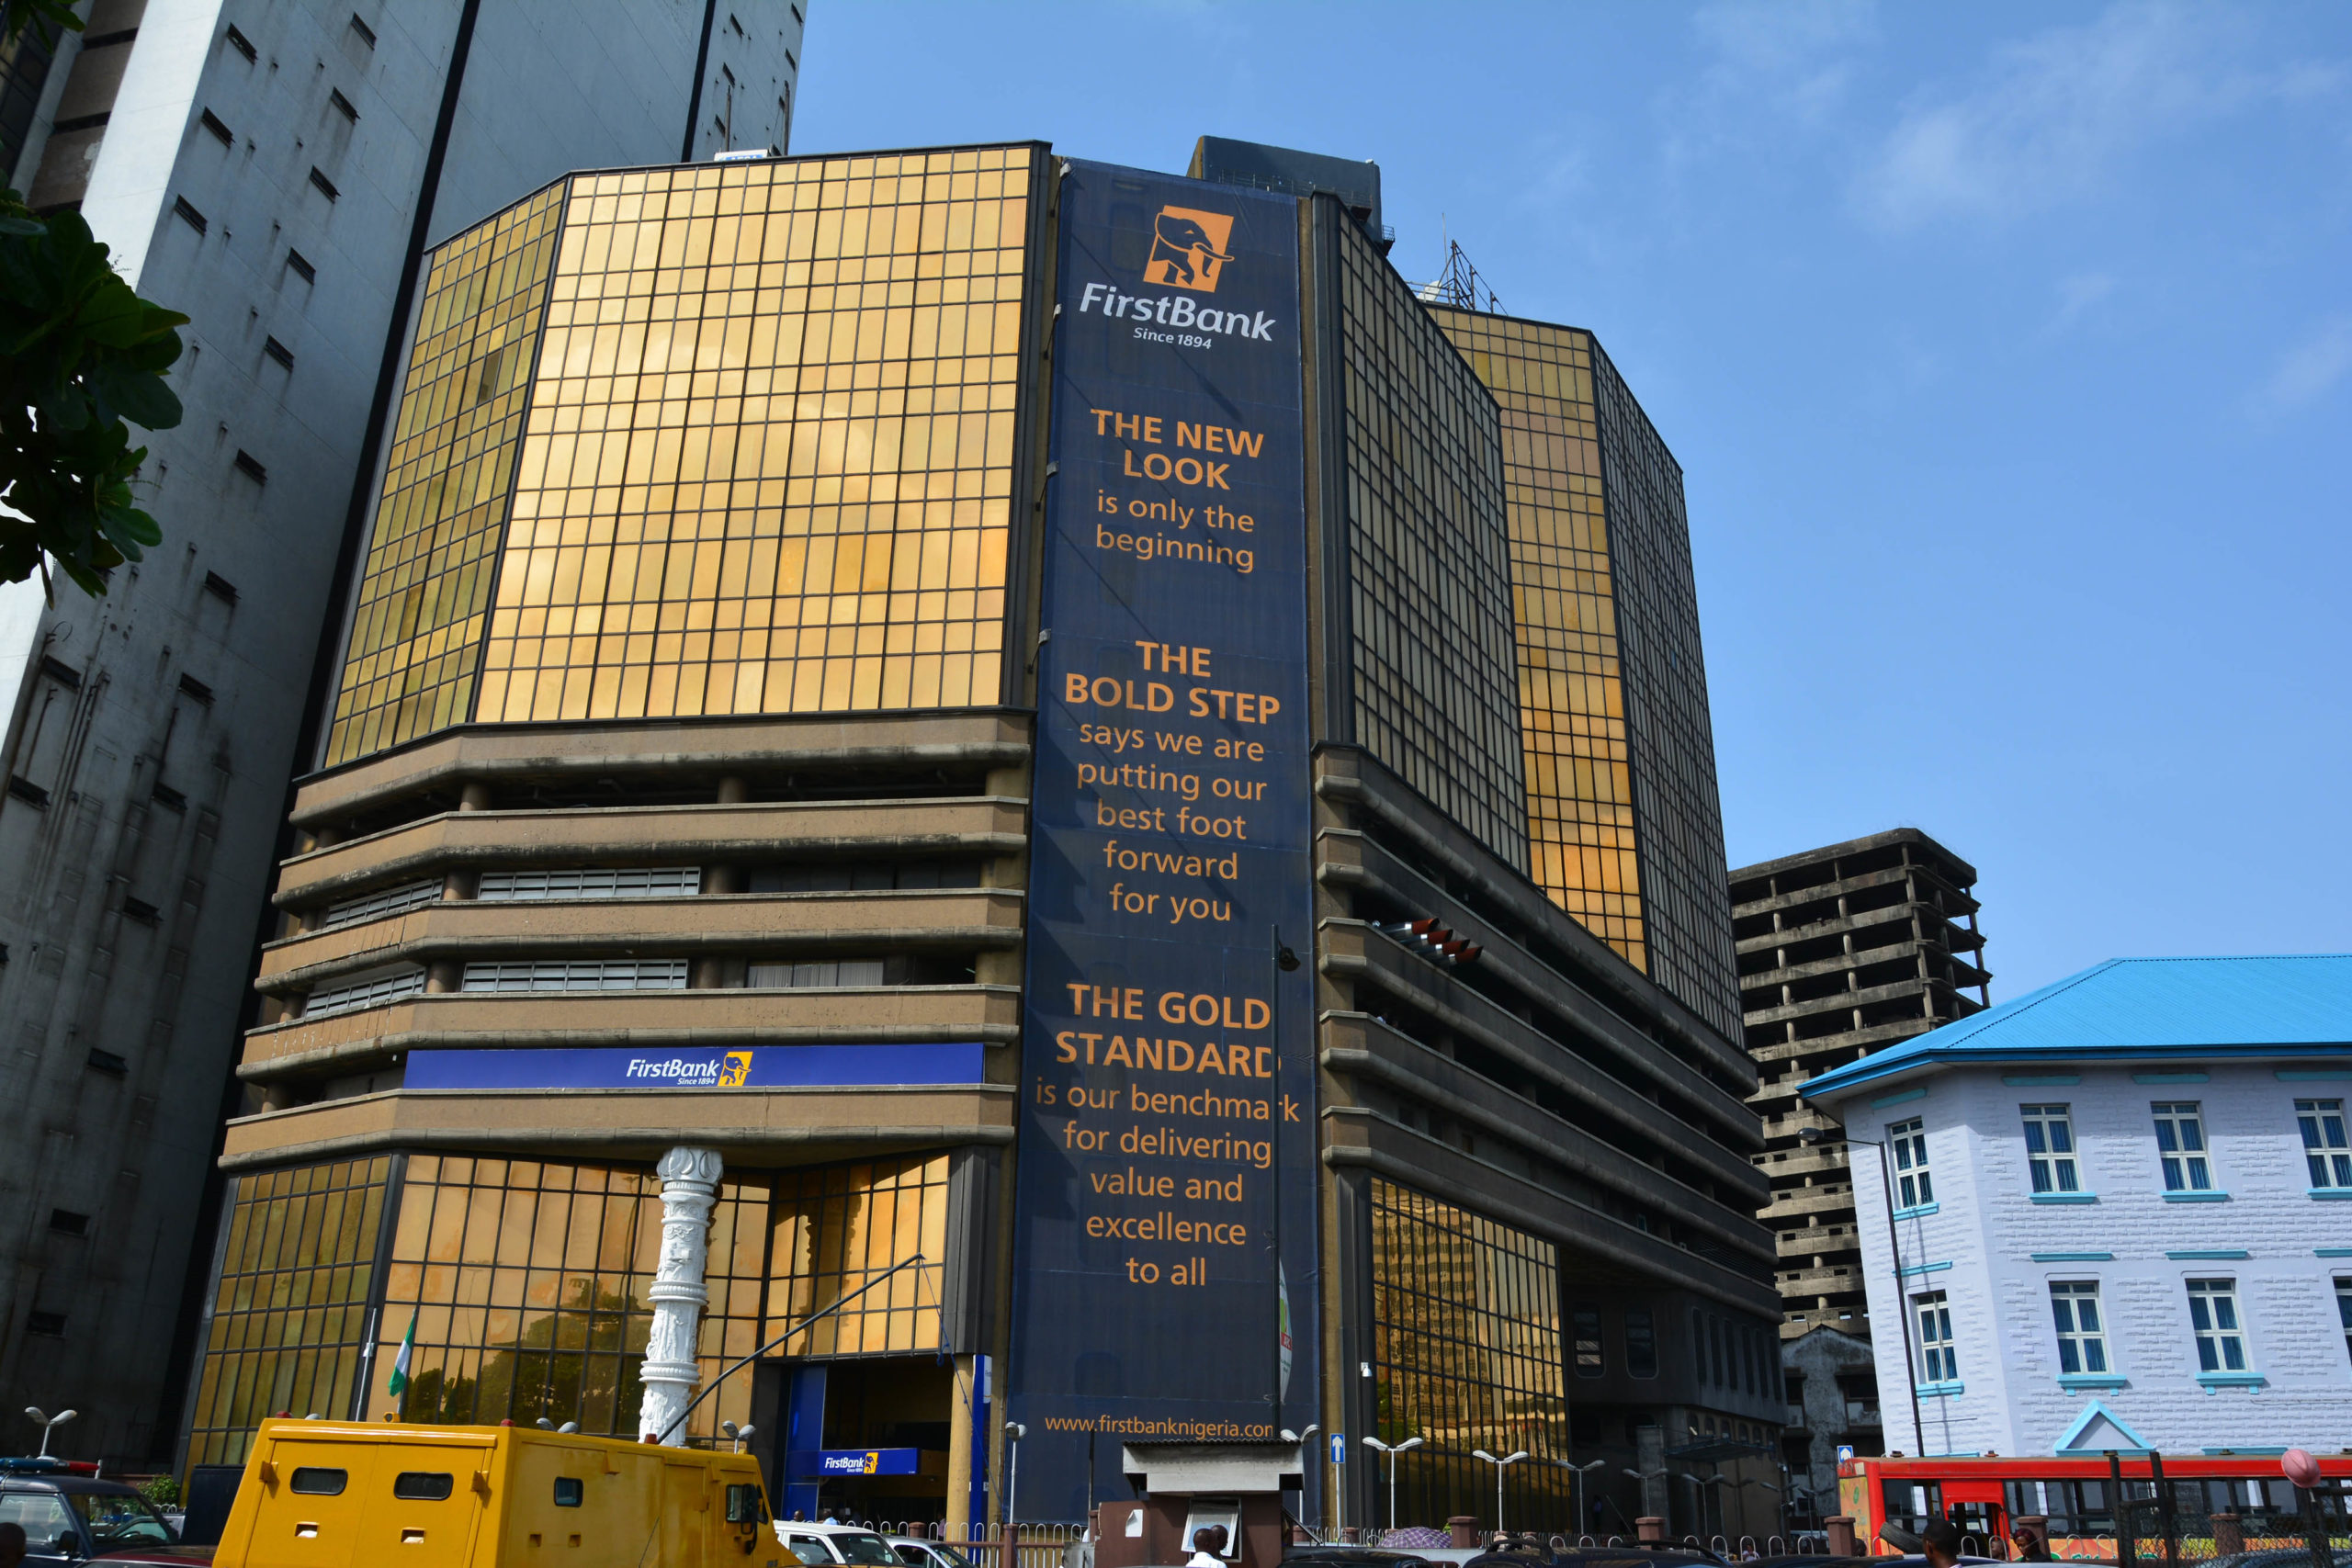 Firstbank clinches the distinguished company financial institution award on the 2023 euromoney awards for excellence